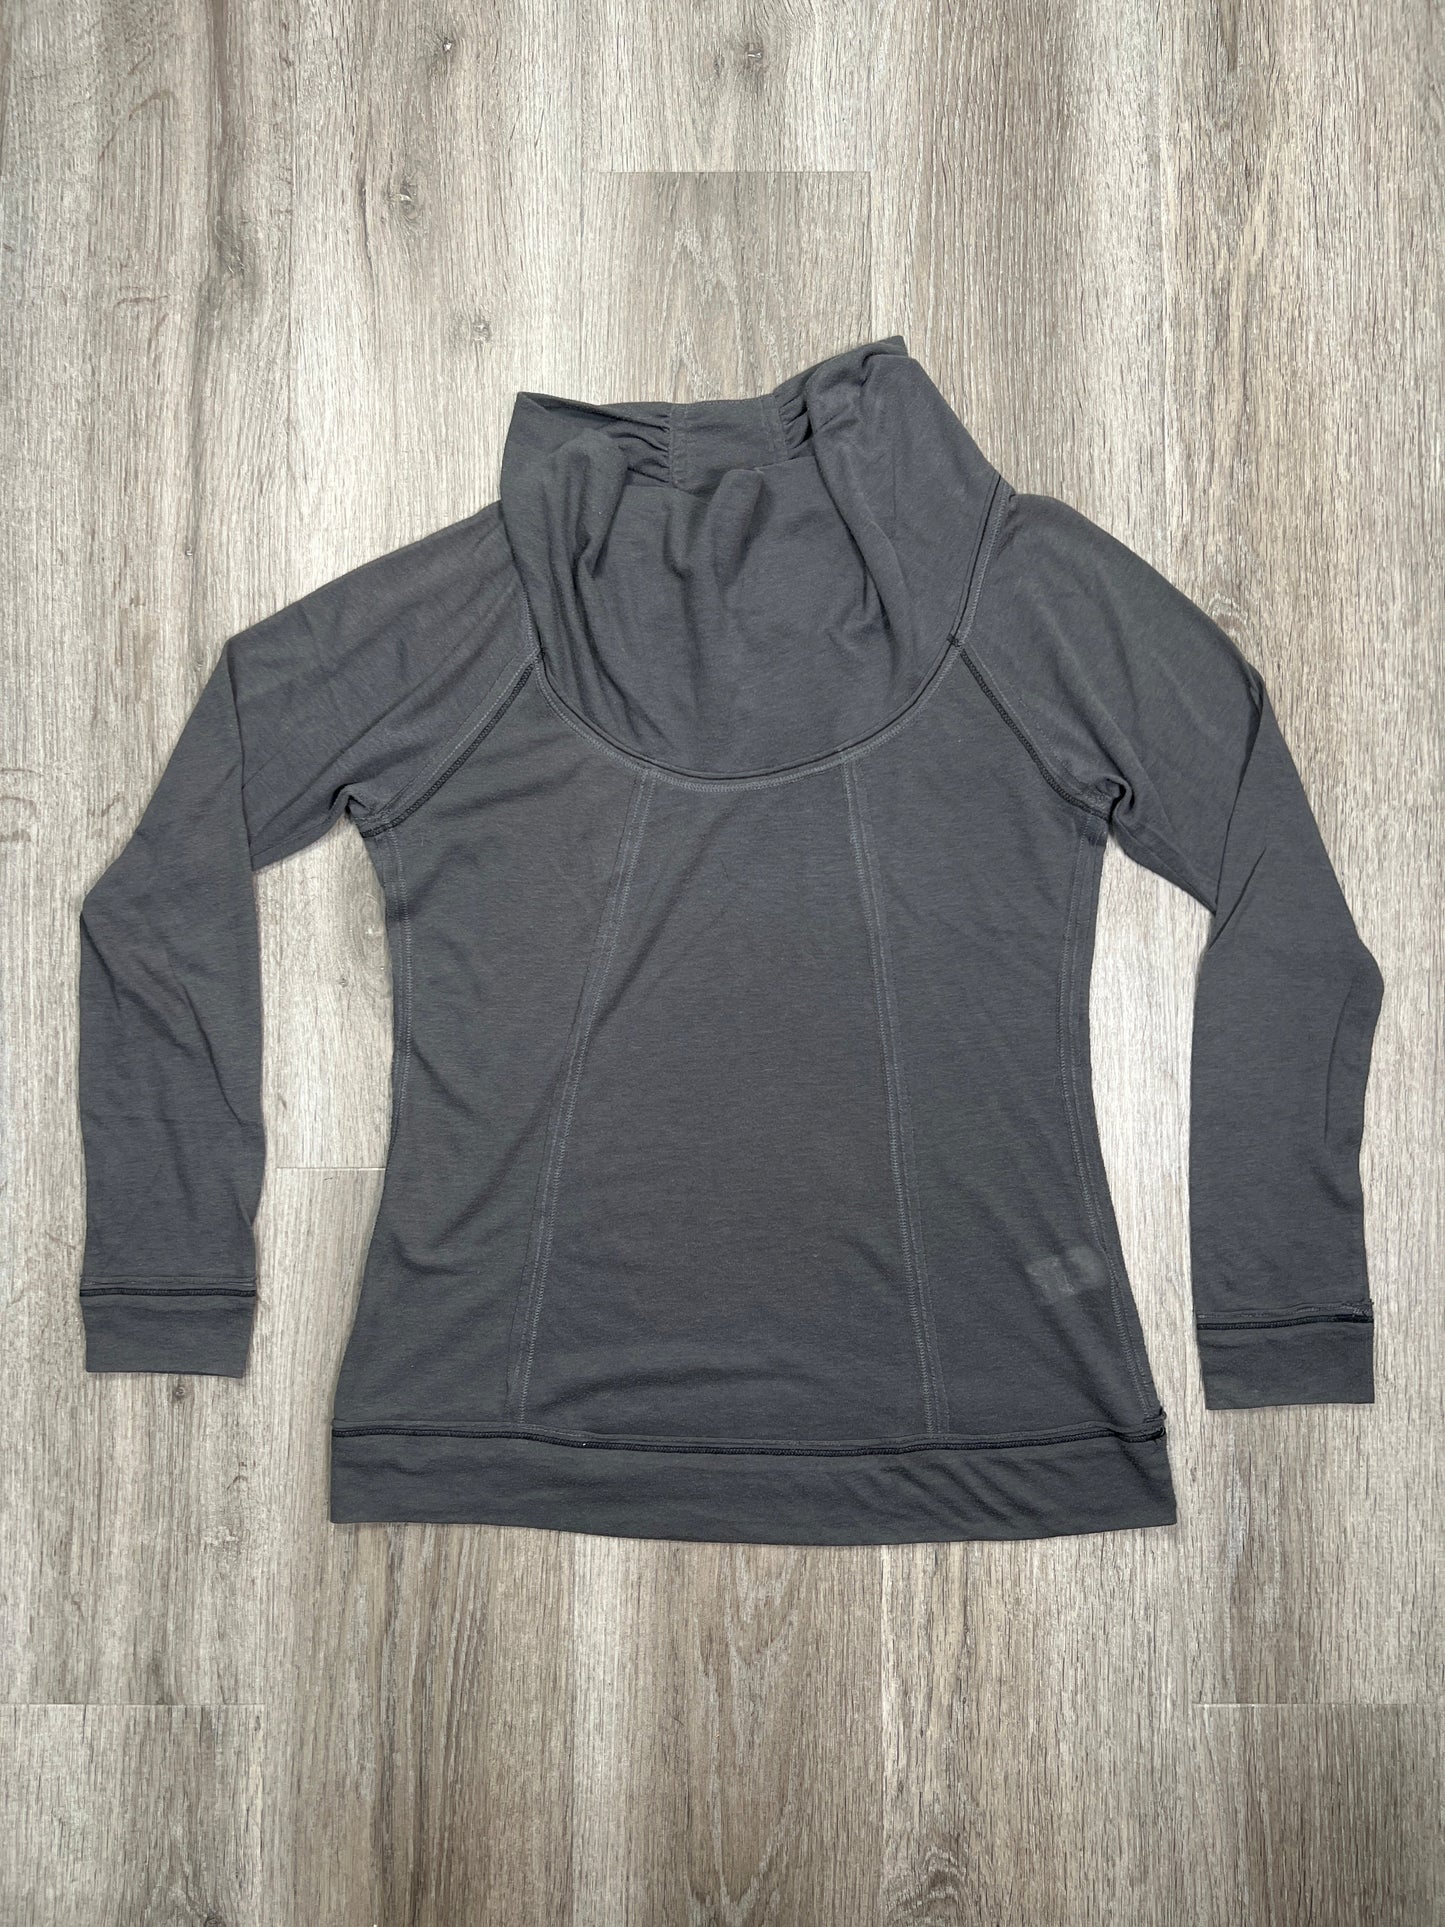 Grey Athletic Top Long Sleeve Collar Alo, Size M